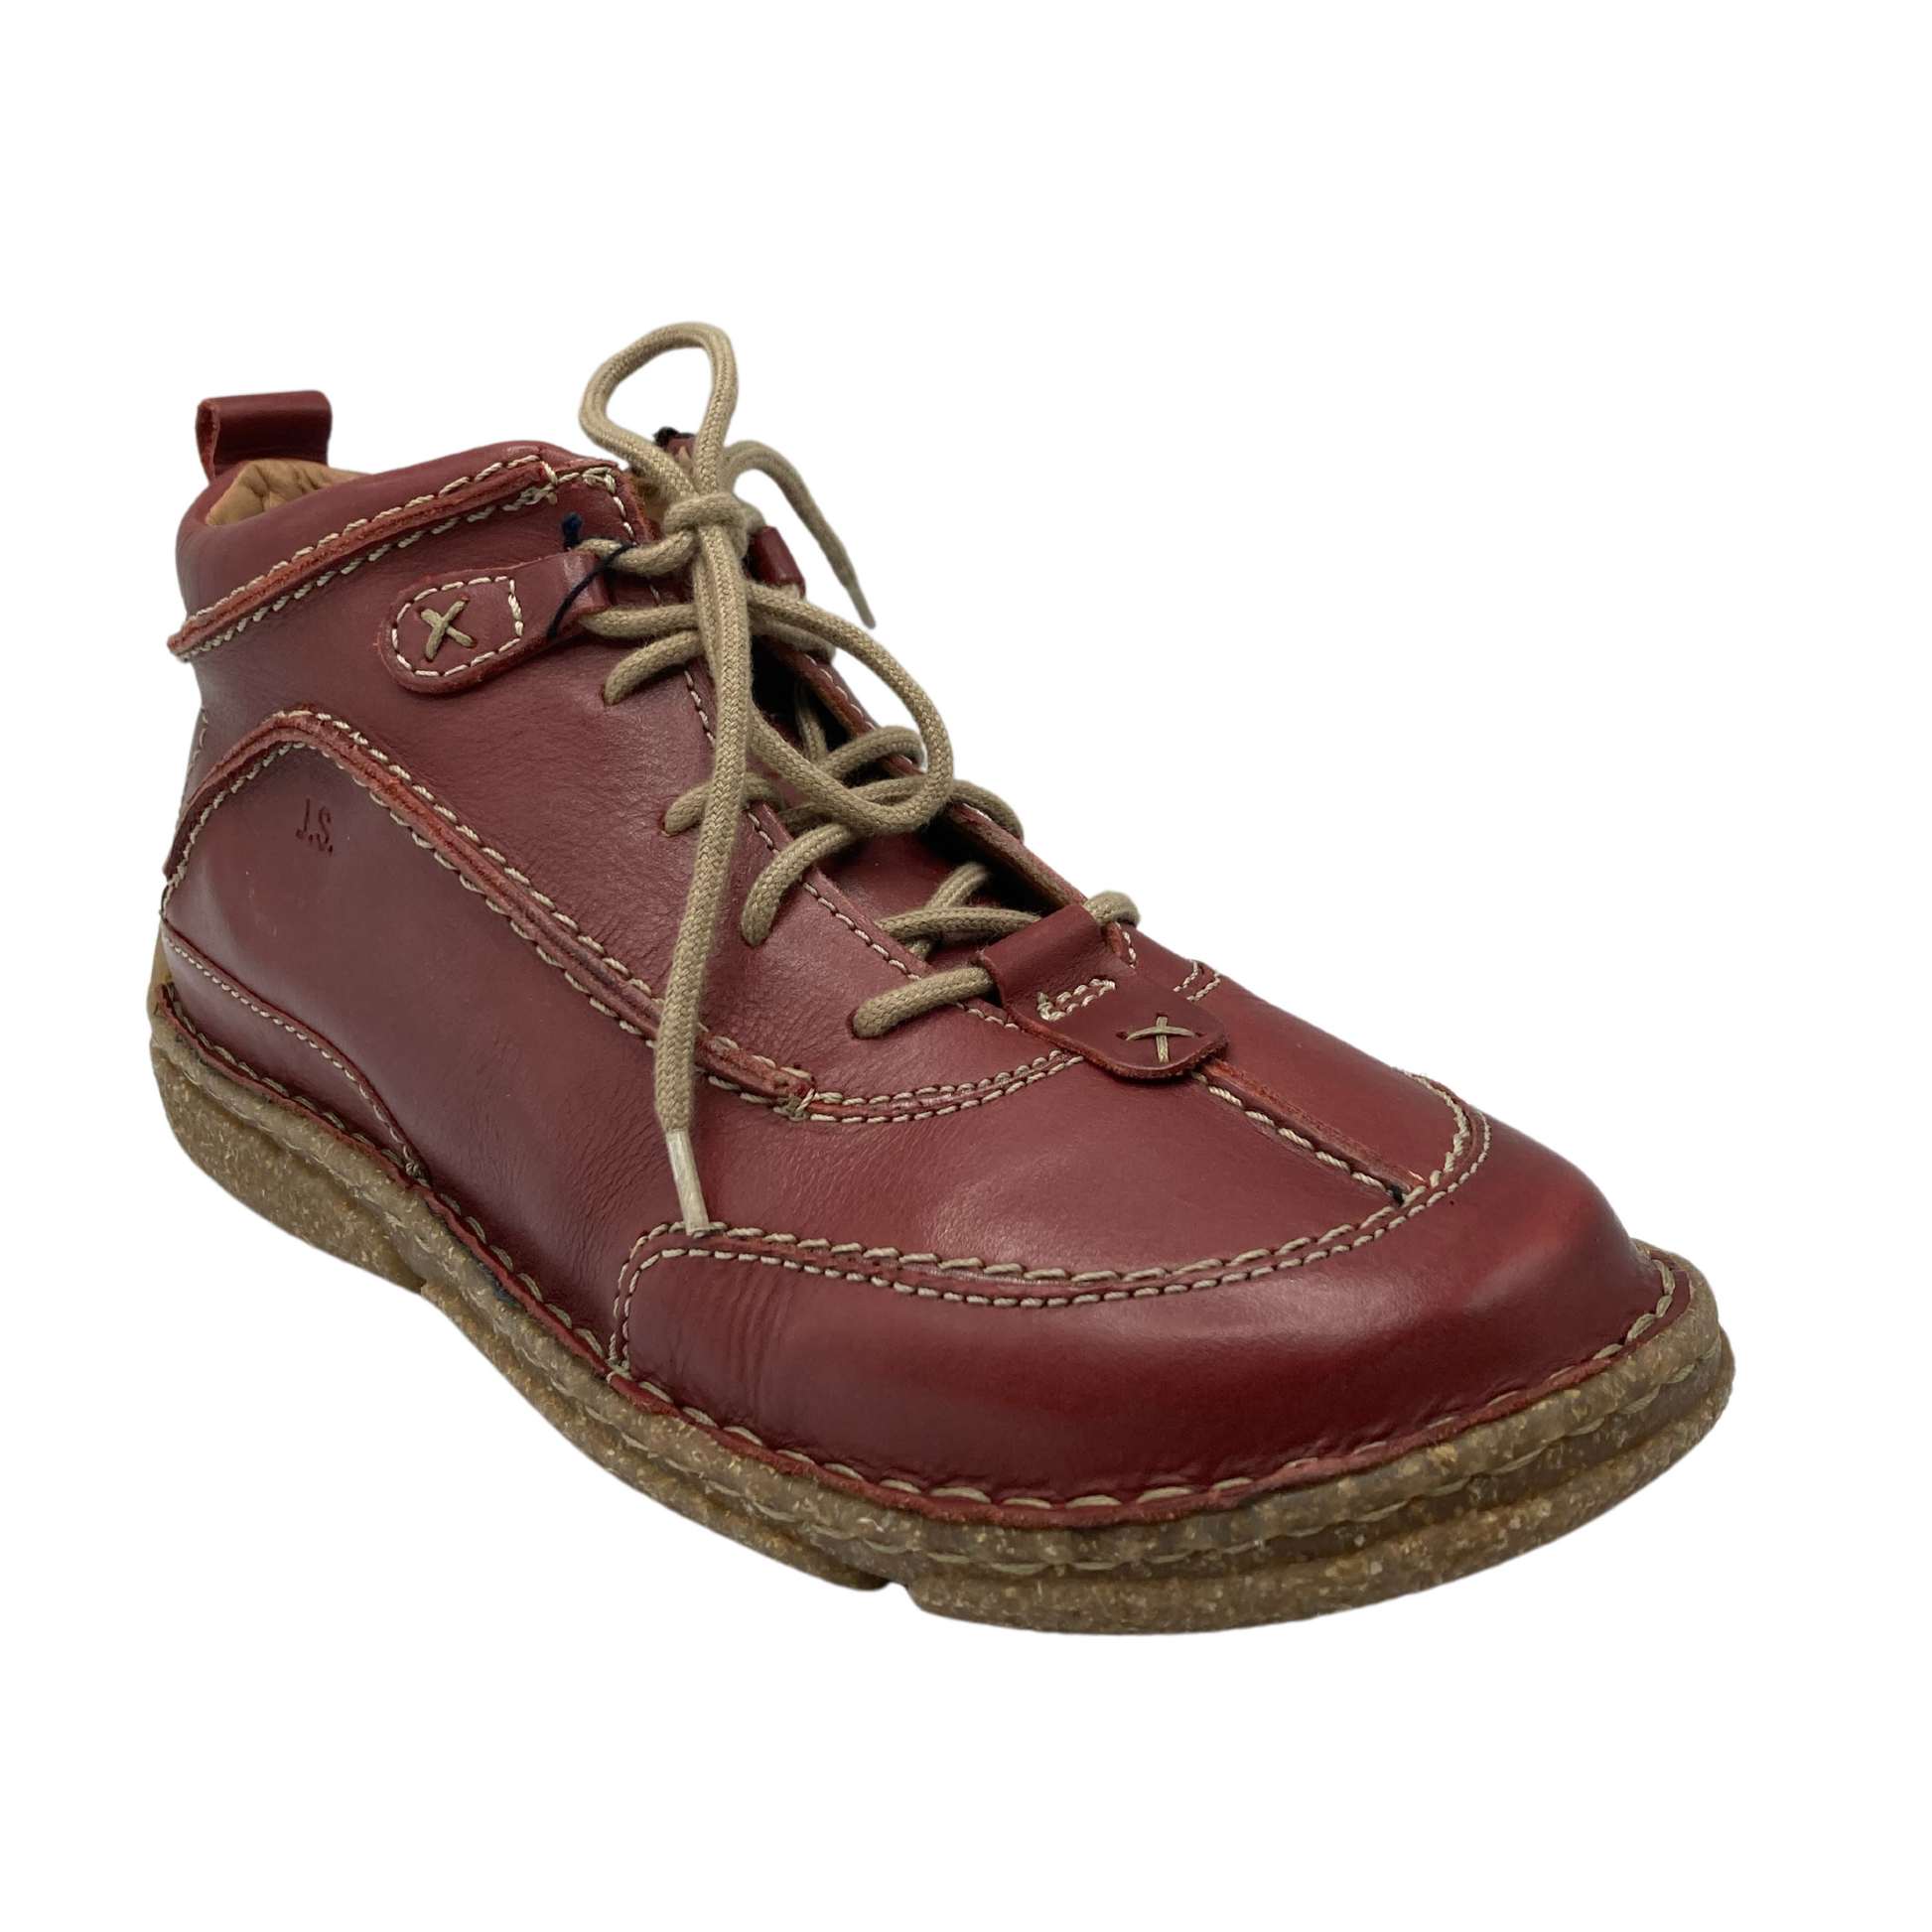 45 degree angled view of red leather shoe with tan laces and tan outsole